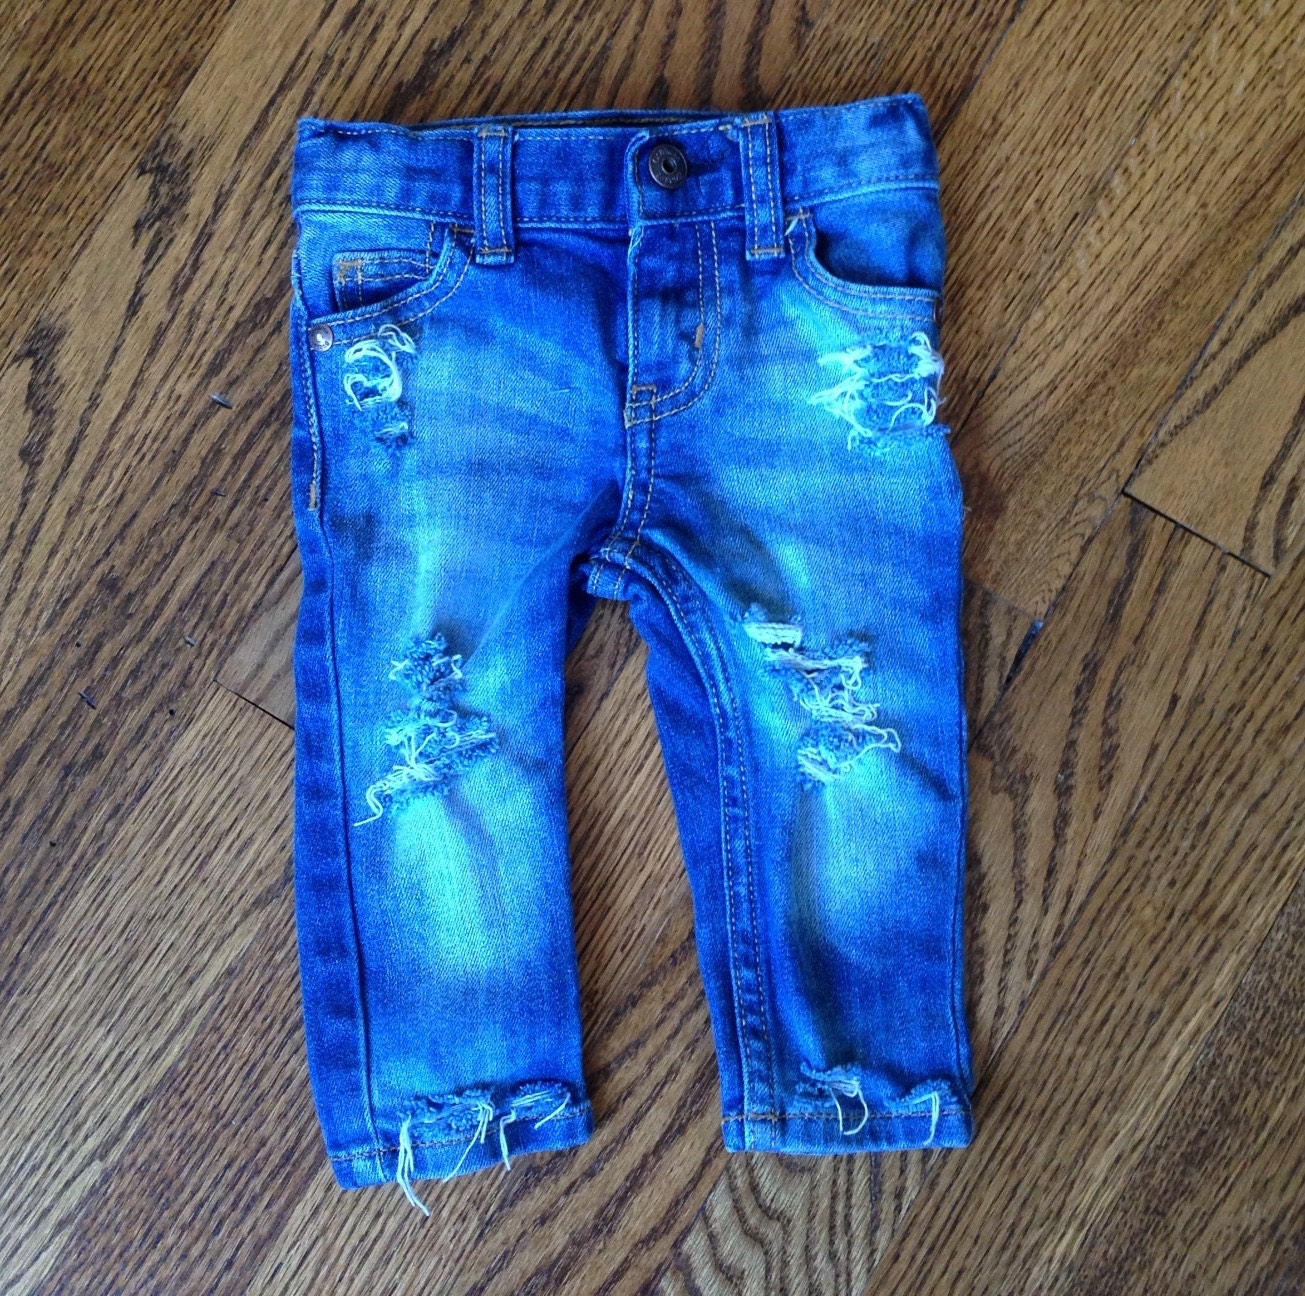 Skinny Mini distressed baby or toddler jeans med/light wash | Etsy